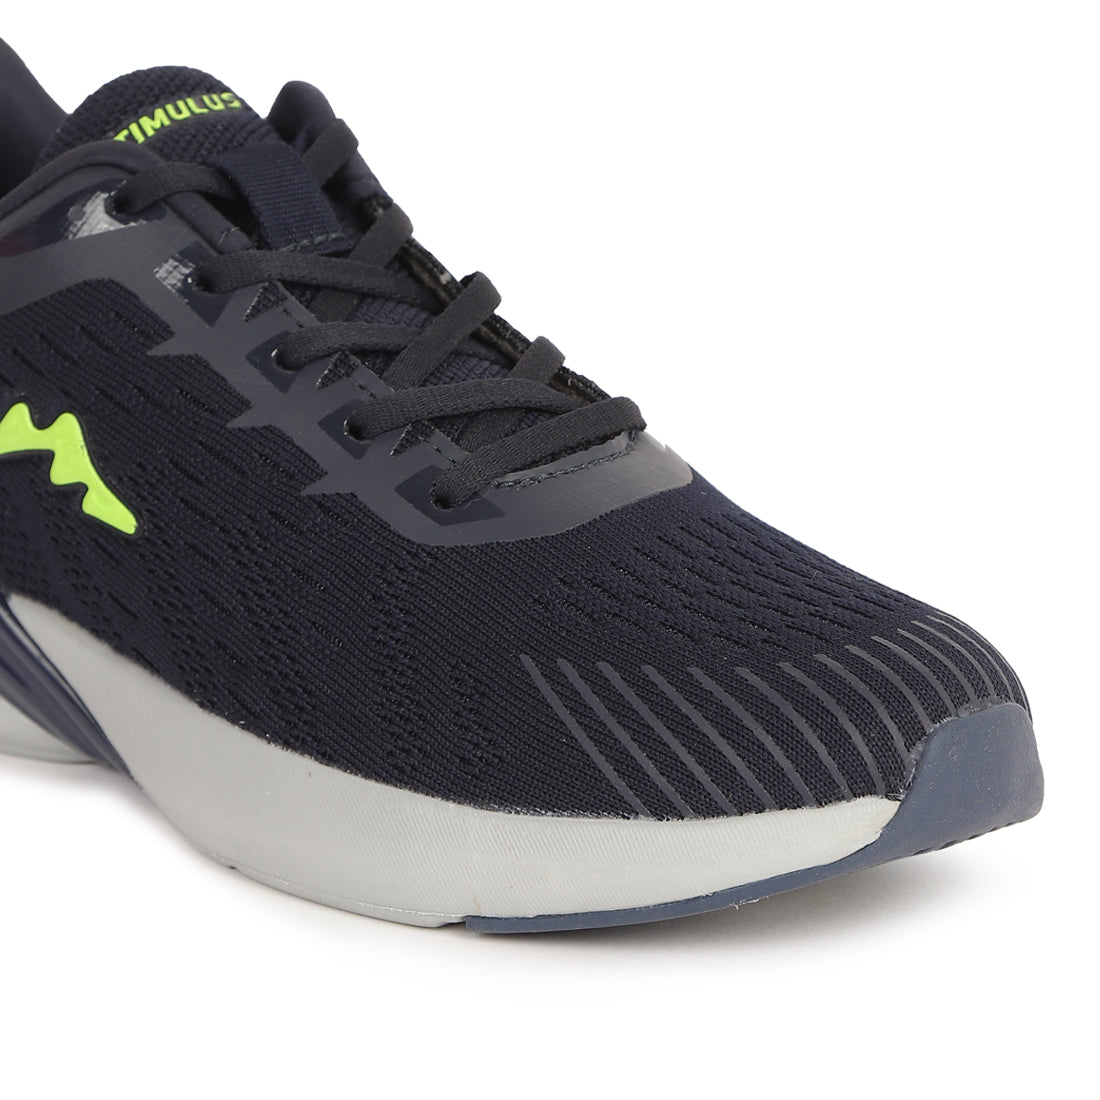 Paragon Stimulus Navy Blue Casual Running Shoes for Men